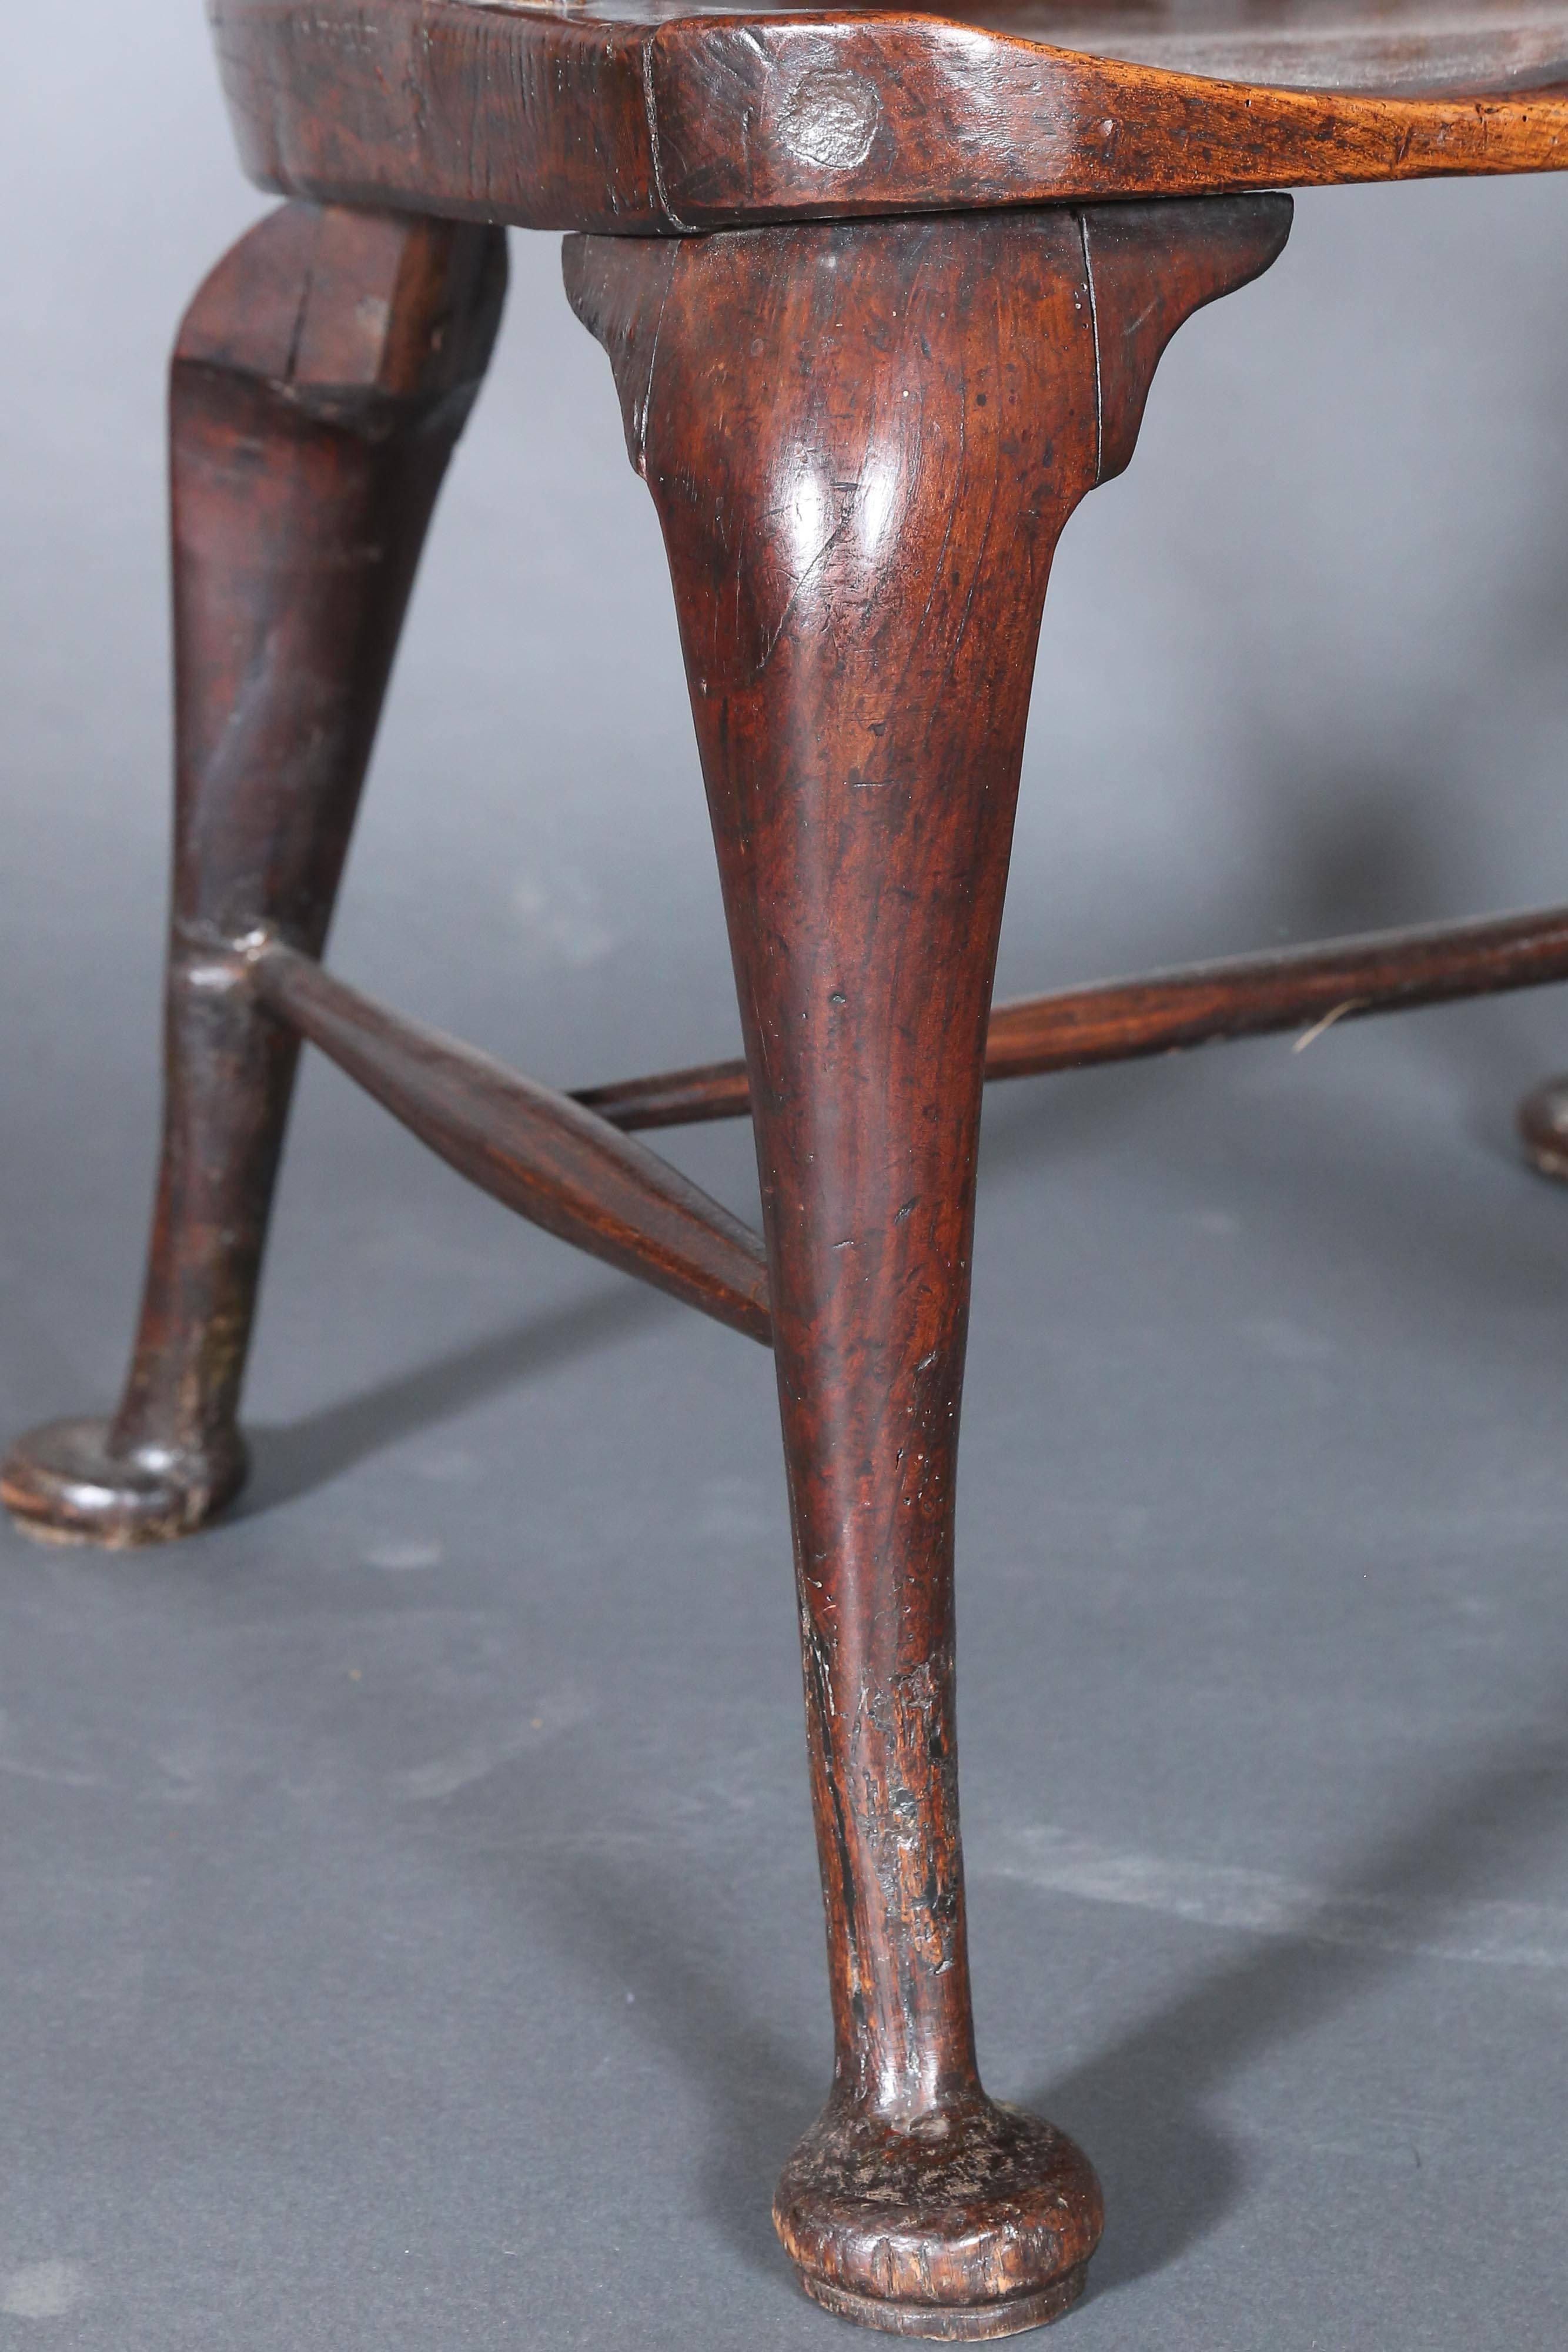 18th English oak windsor chair has a very distinct look, as it is tall and narrow Shaker look.
Chair has a saddle seat and Queen Anne cabriole legs with pad feet.
Rear legs are also cabriole, which is quite unusual.
Back has 16 spindles with